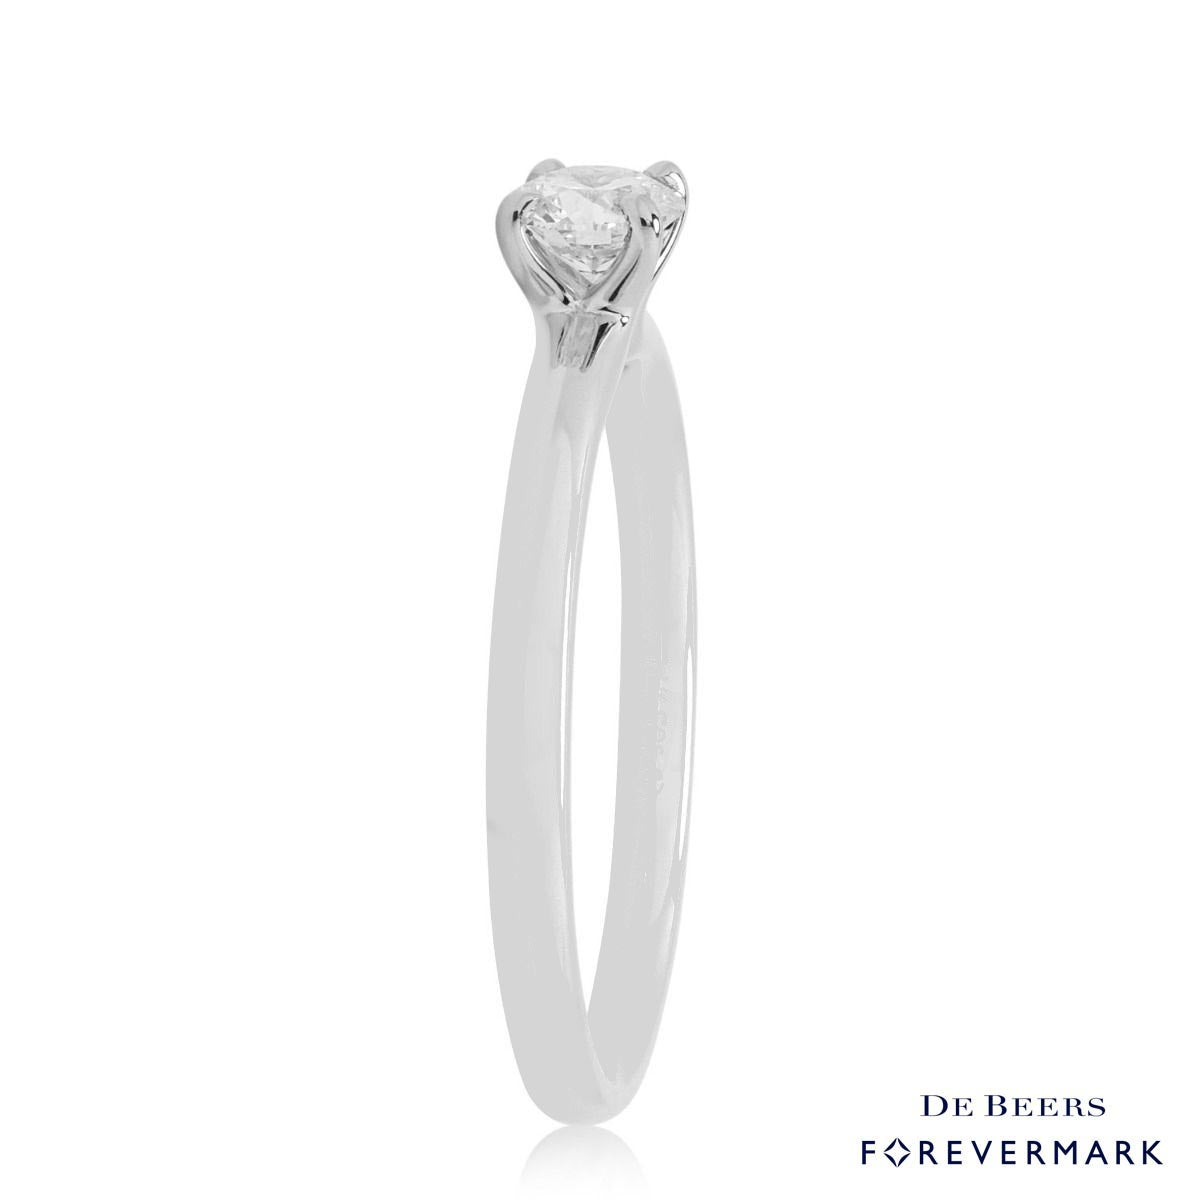 De Beers Forevermark Diamond Solitaire Engagement Ring in 14kt White Gold (1/3ct)